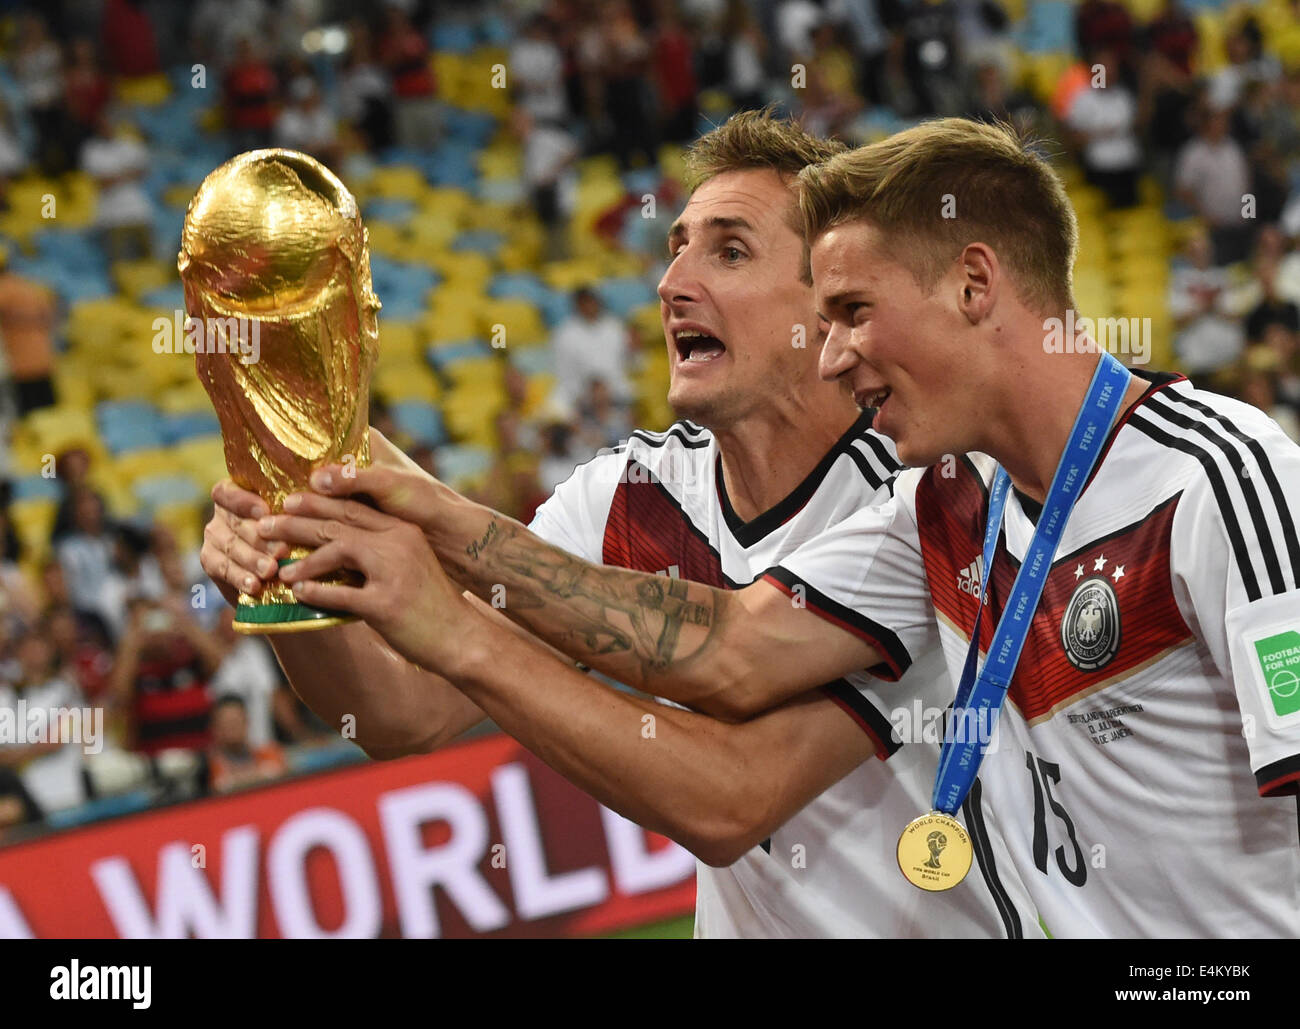 Rio de Janeiro, Brazil. 13th July, 2014. Miroslav Klose (L) and Erik Durm celebrate with the trophy after winning the FIFA World Cup 2014 final soccer match between Germany and Argentina at the Estadio do Maracana in Rio de Janeiro, Brazil, 13 July 2014. Photo: Andreas Gebert/dpa/Alamy Live News Stock Photo